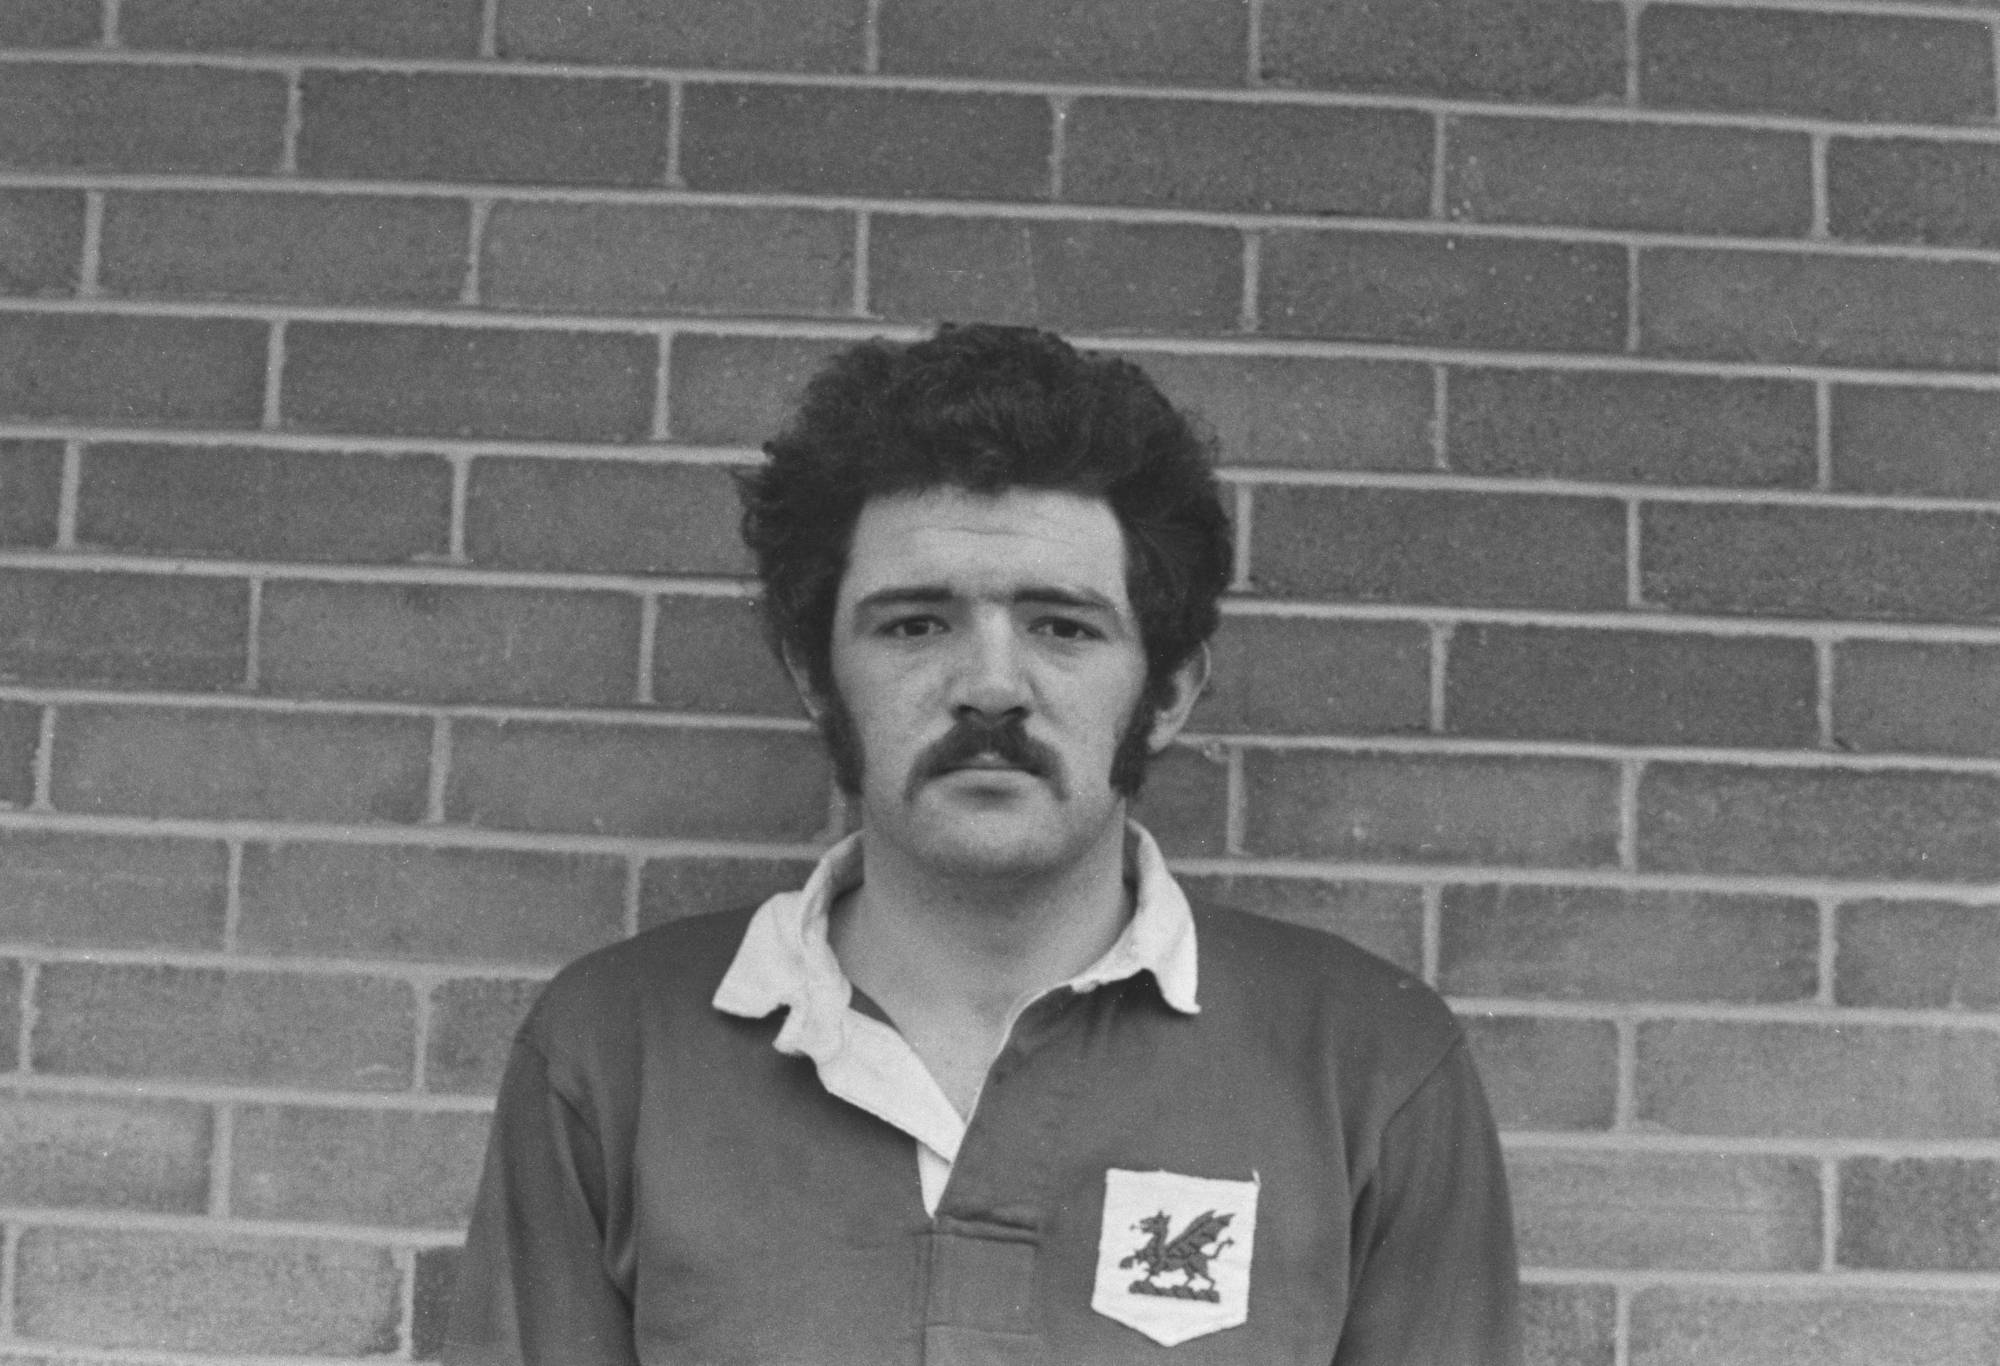 Welsh rugby union player Mervyn Davies (1946 - 2012) of the London Welsh RFC, UK, December 1971. (Photo by Evening Standard/Hulton Archive/Getty Images)